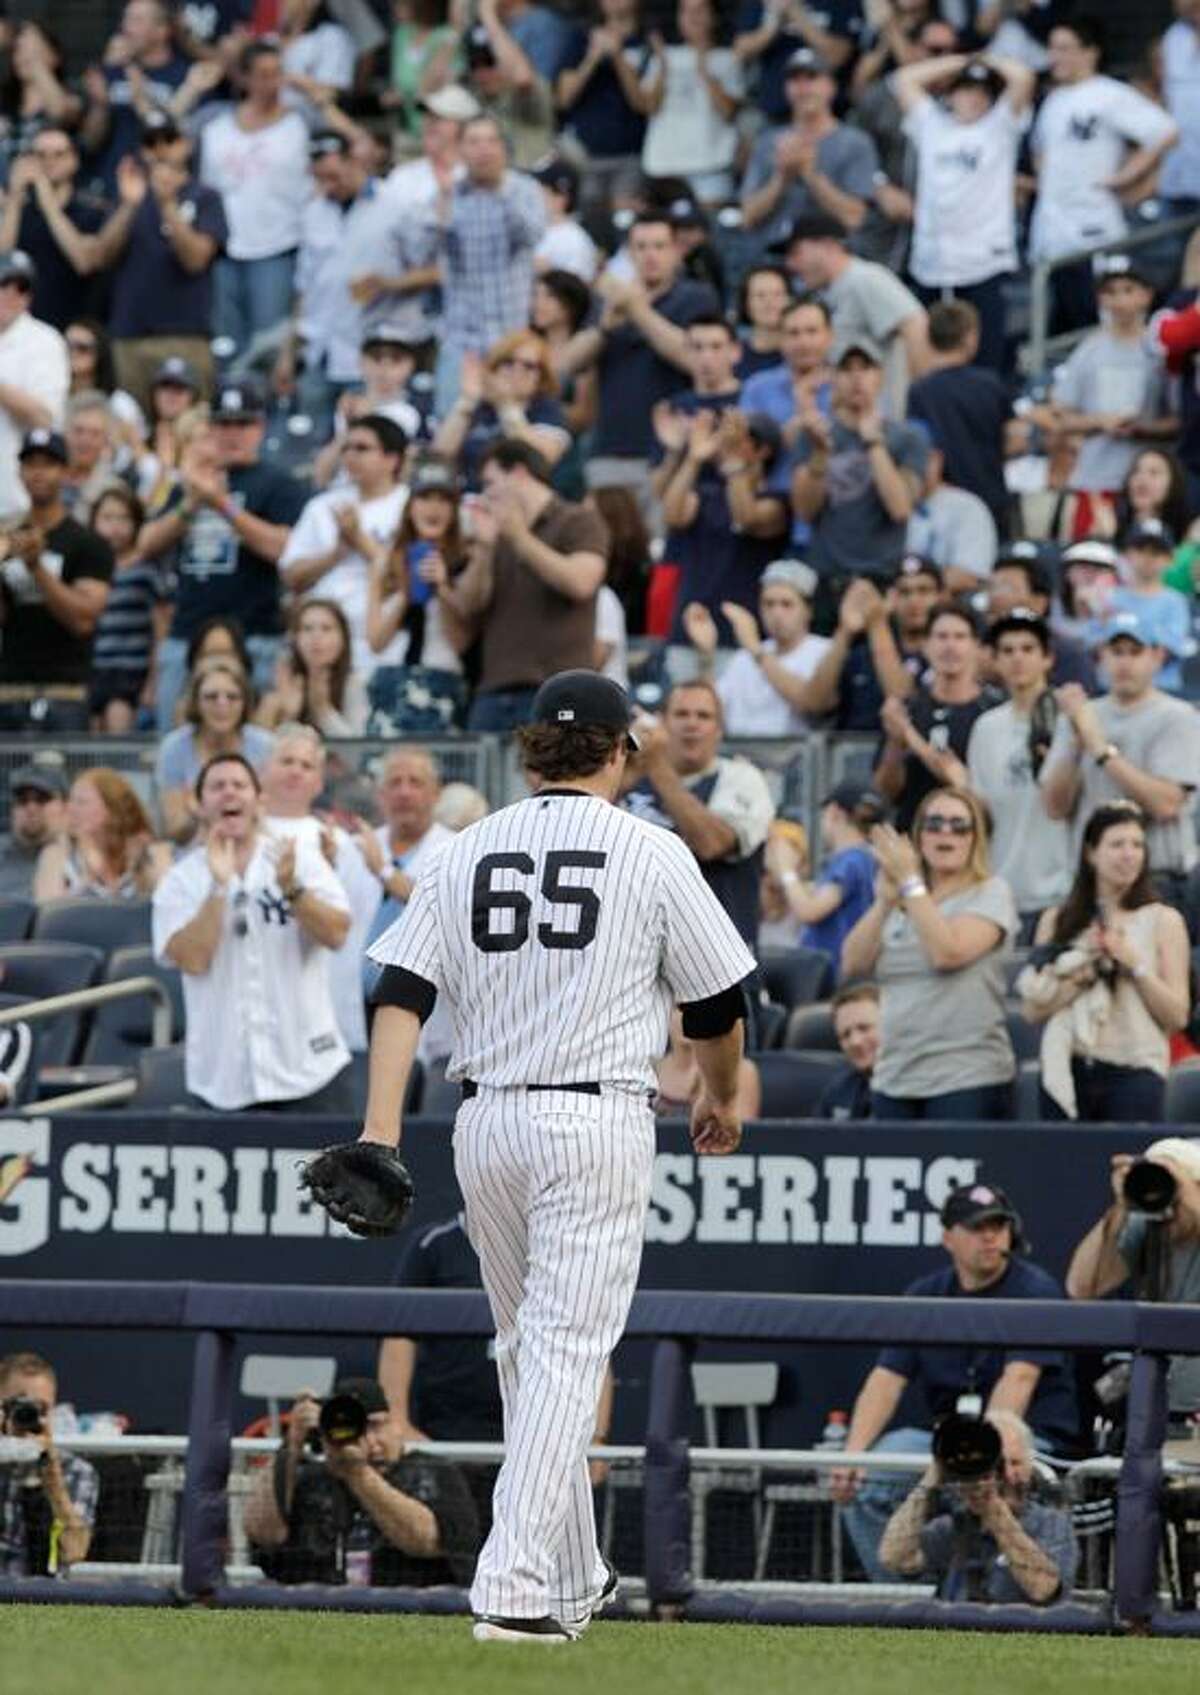 New York Yankees starting pitcher Phil Hughes is cheered by fans as he leaves a baseball game against the Seattle Mariners in the eighth inning on Saturday, May 12, 2012 in New York. The Yankees won the game 6-2. (AP PhotoPeter Morgan)